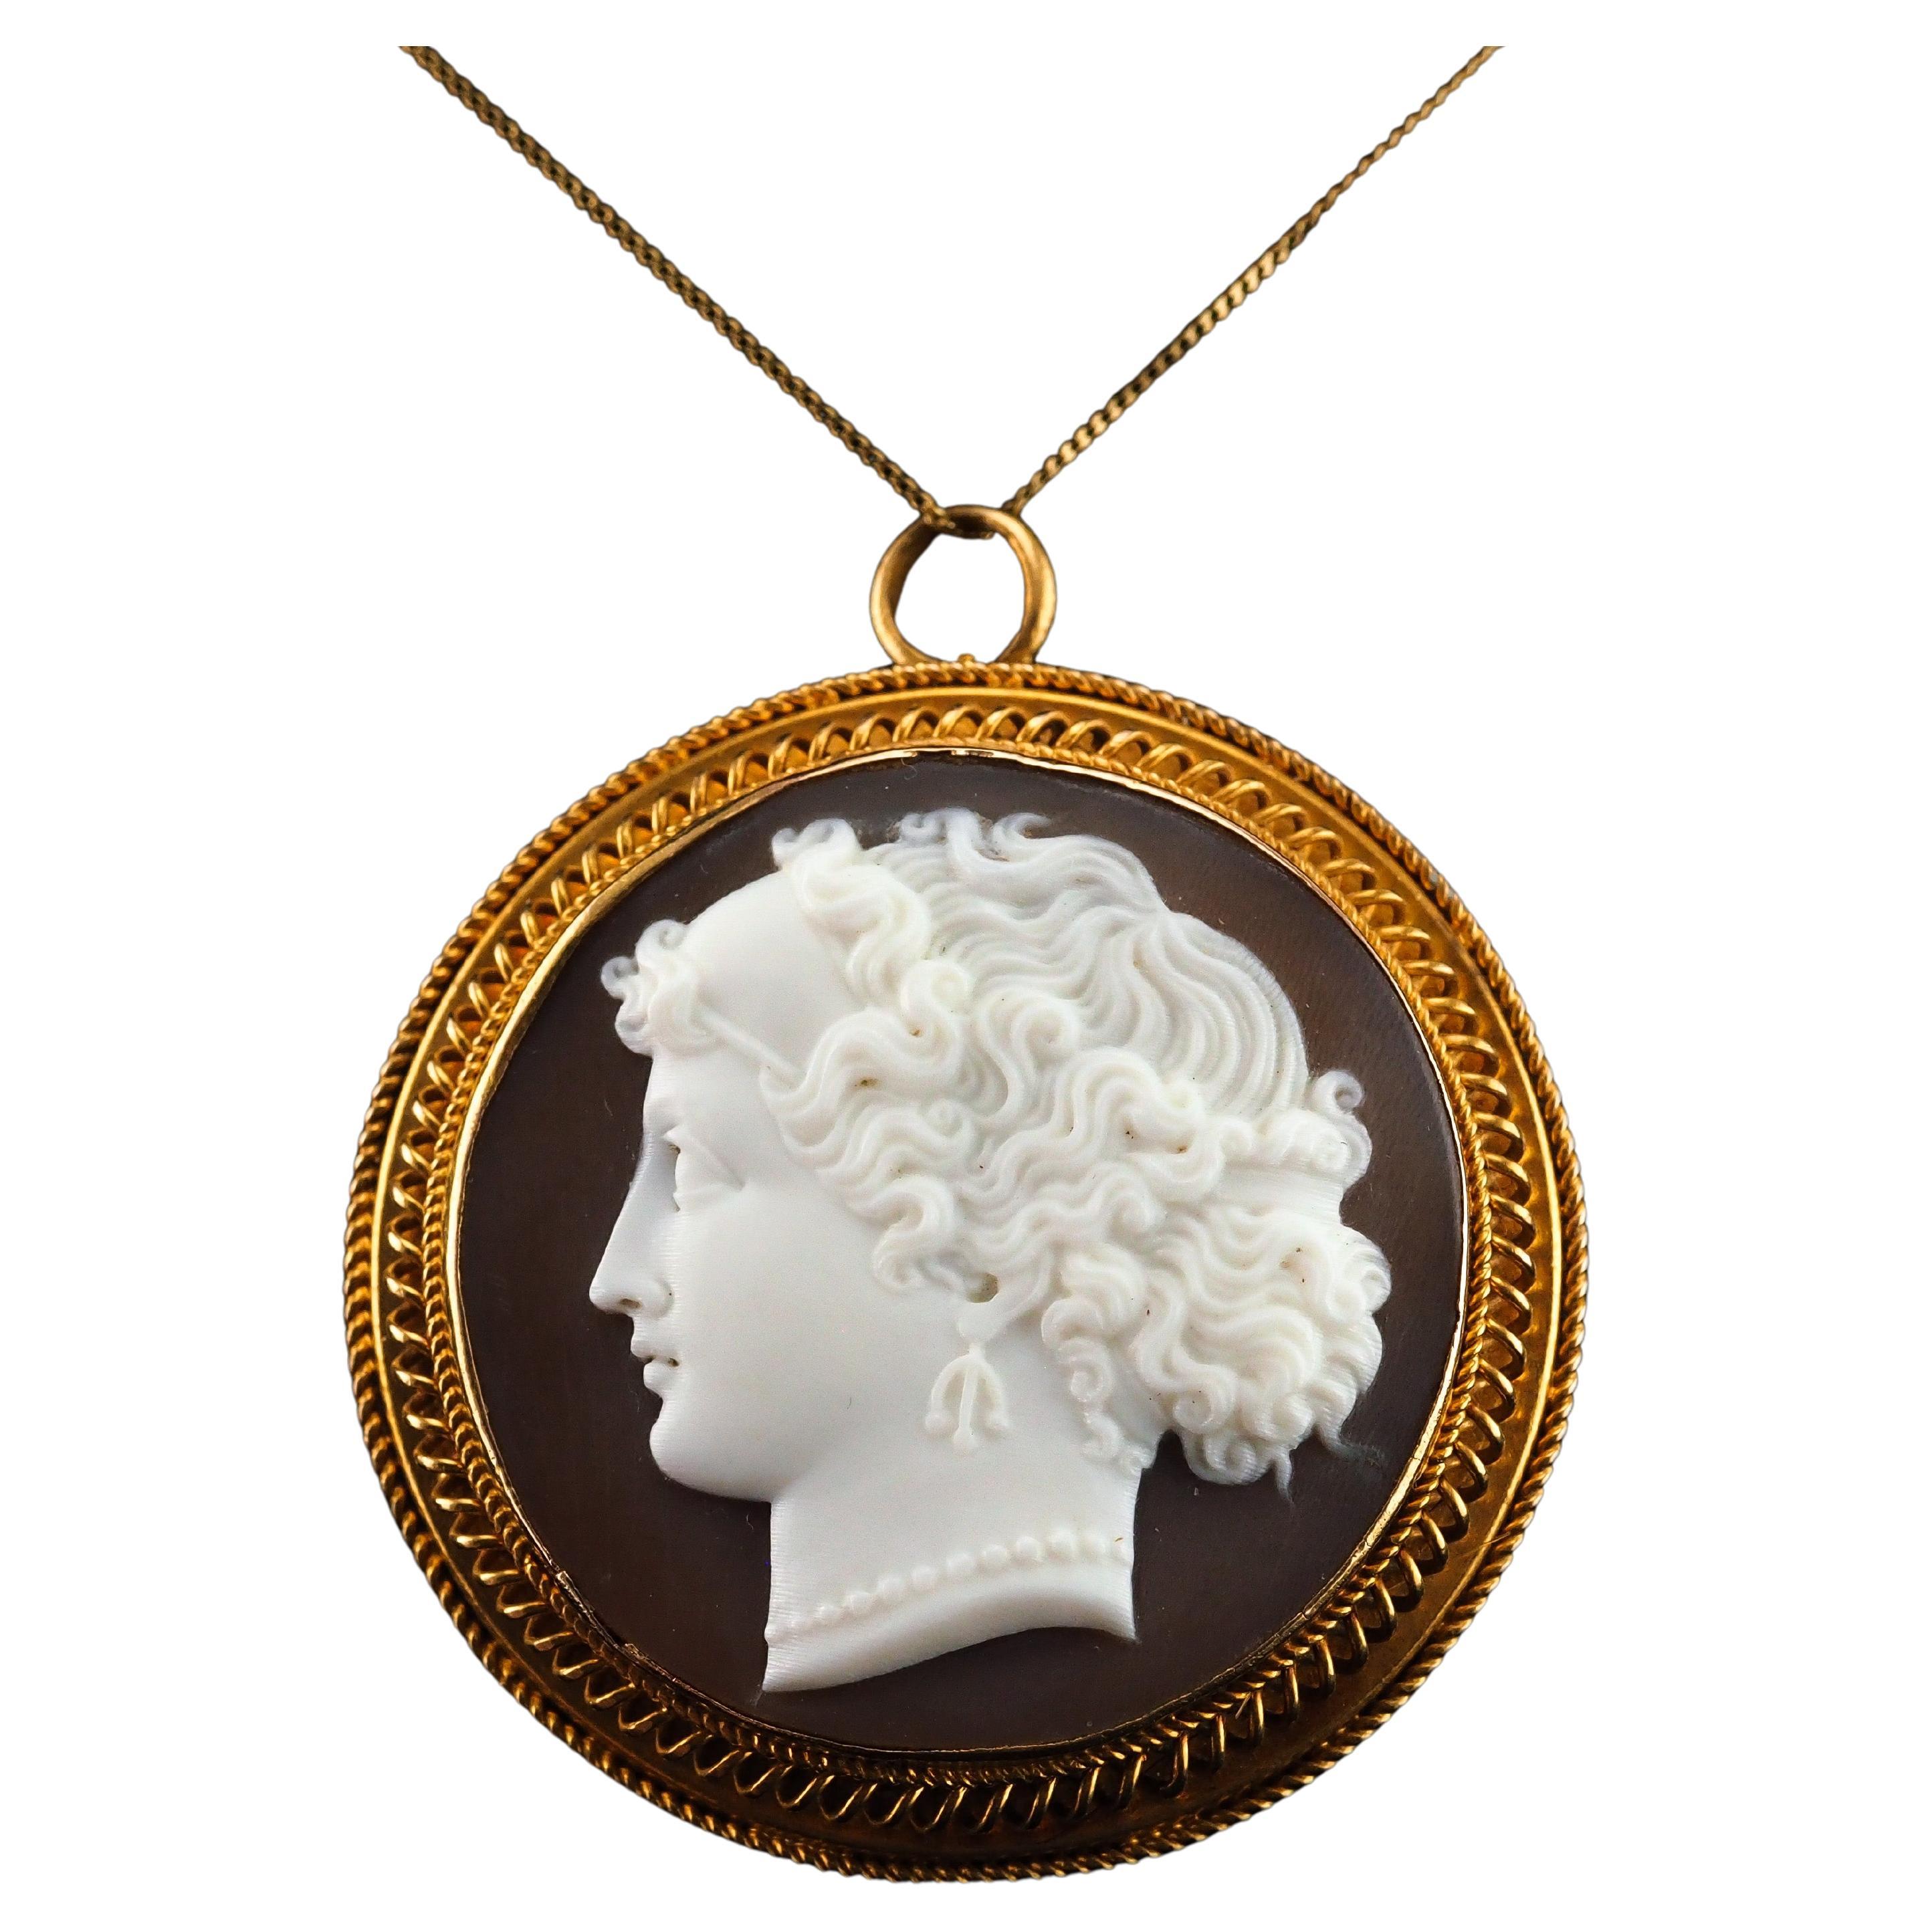 Antique Victorian Cameo 18K Gold Brooch/Pendant Necklace - c.1880 For Sale